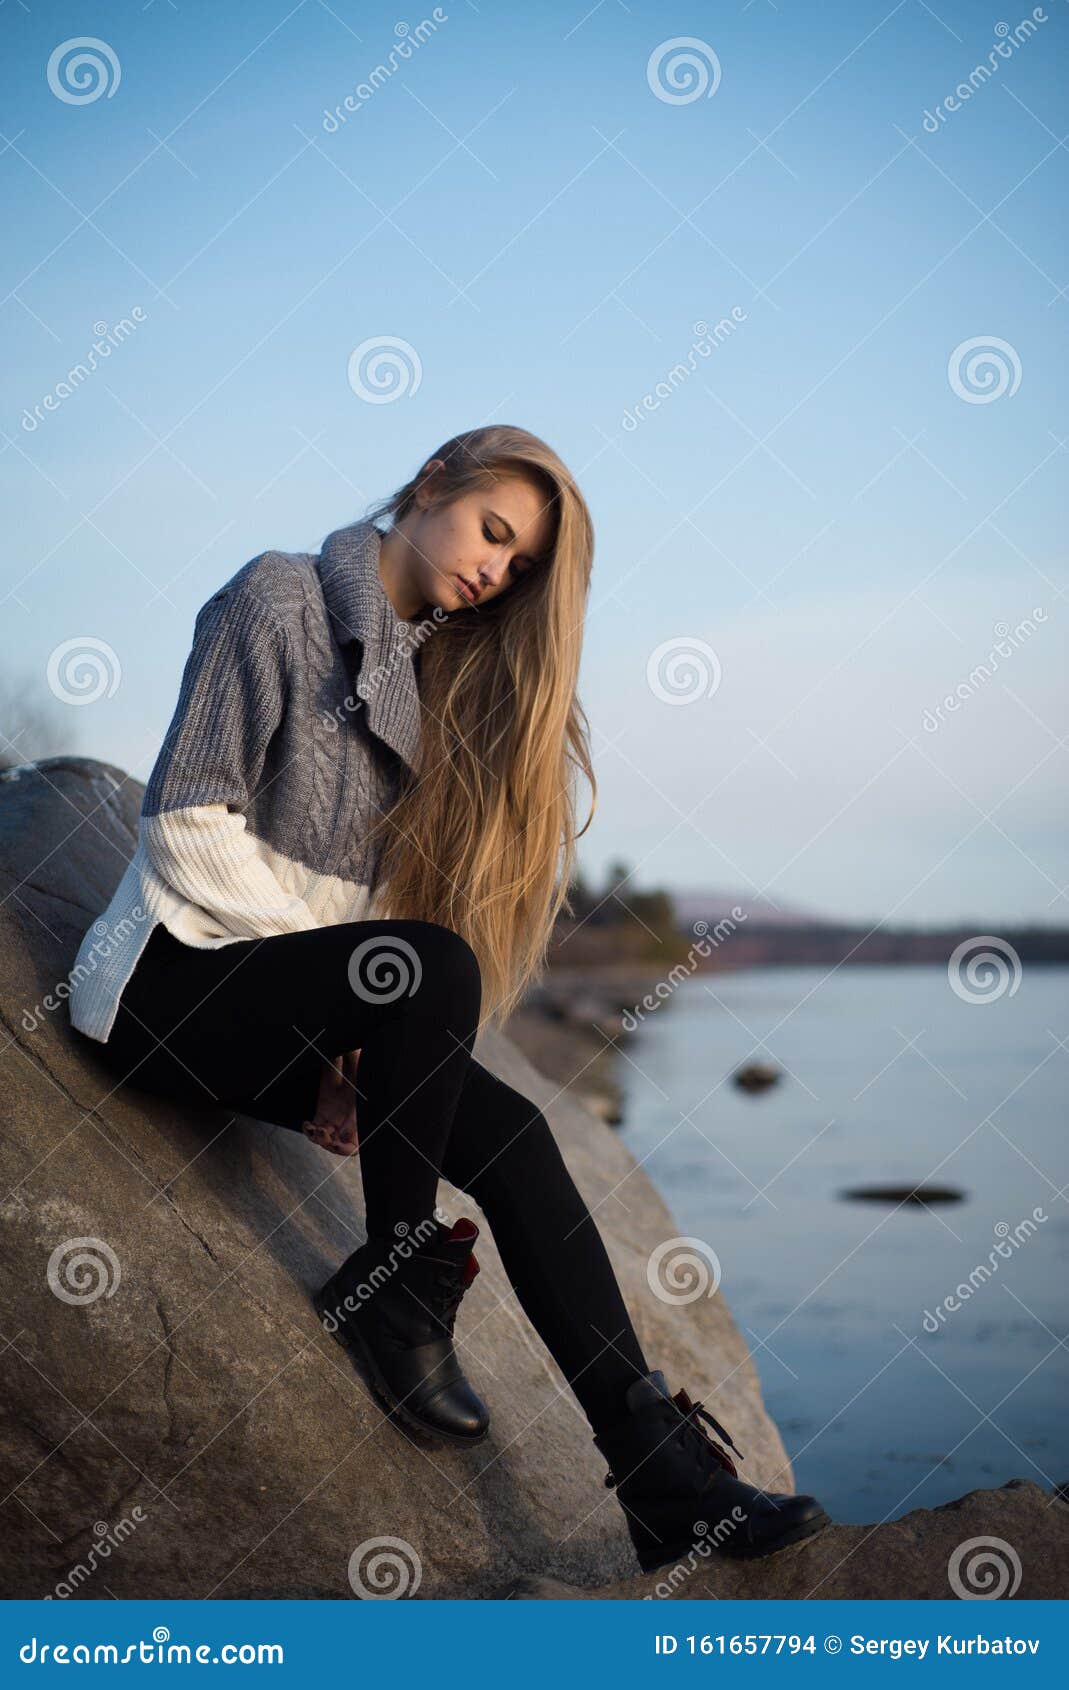 Sad Young Girl Sitting Alone on a Stone Outdoors. Teenage Girl ...